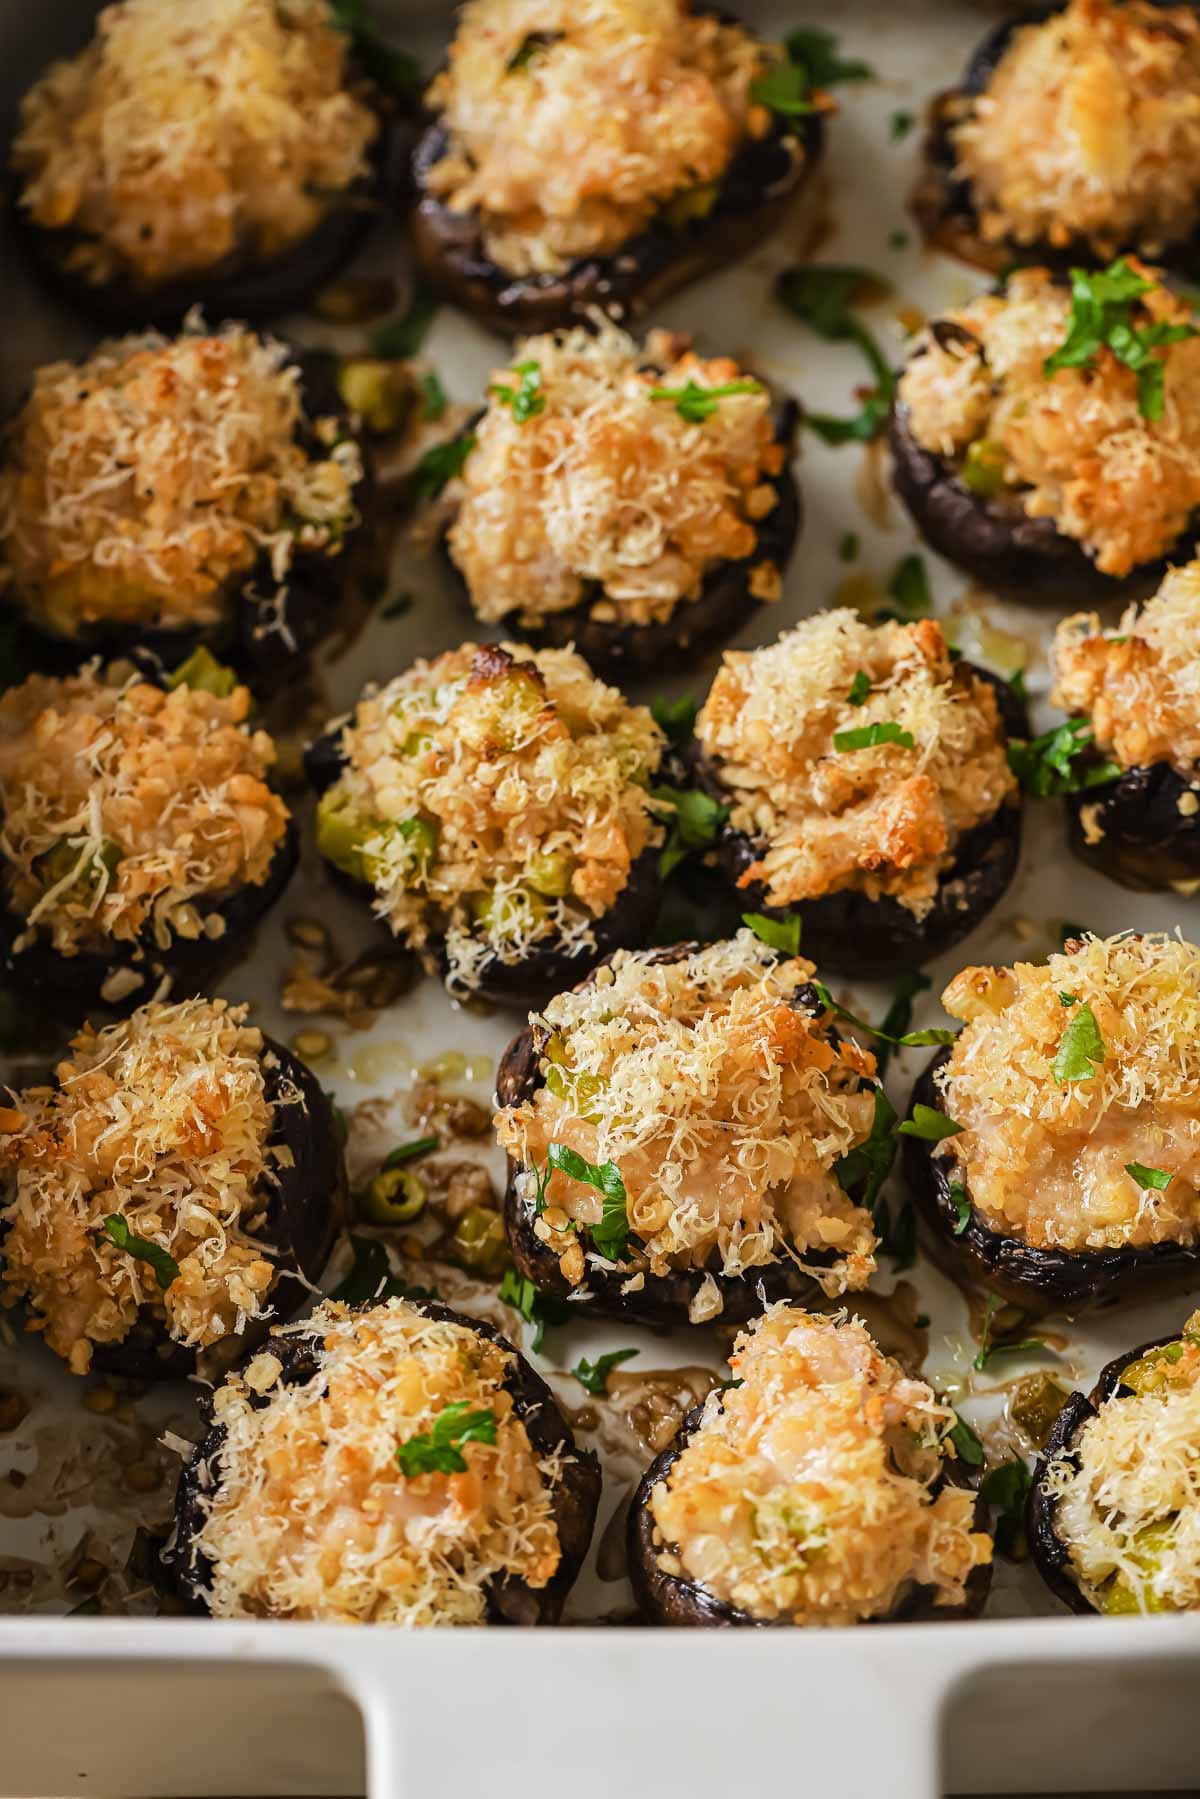 Photo shows mushrooms stuffed with shrimp seafood filling and baked in a casserole dish.